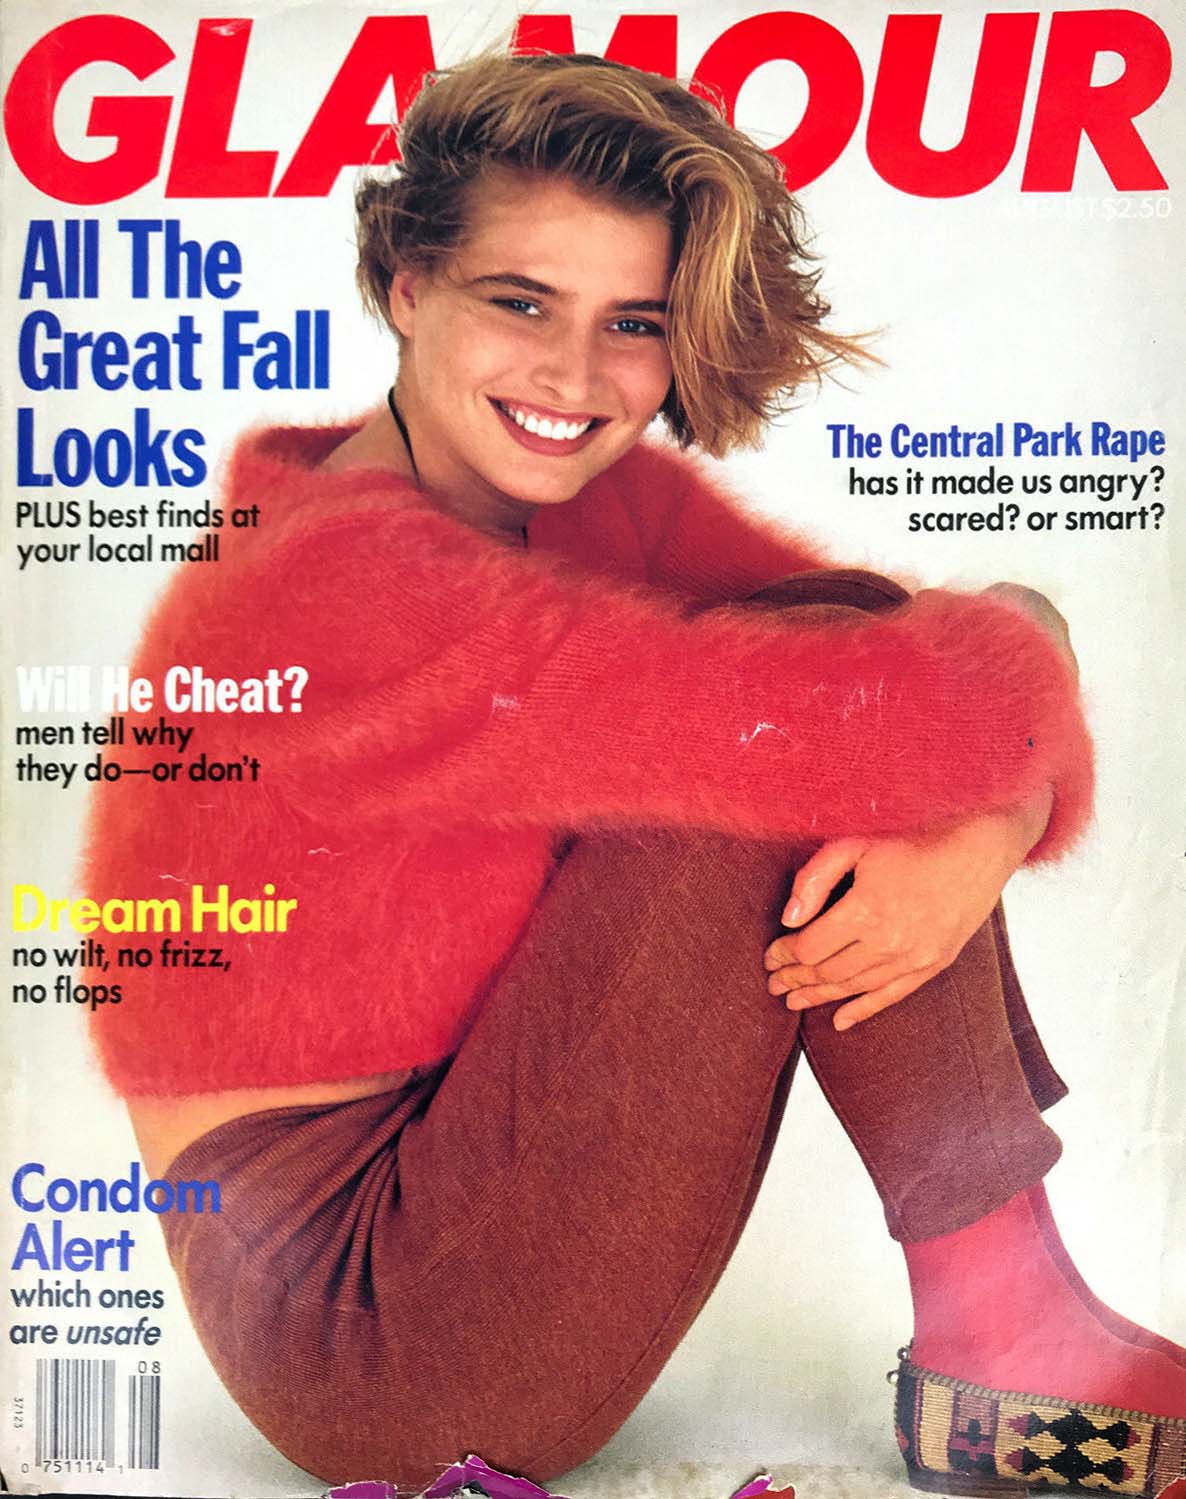 Glamour August 1989 magazine back issue Glamour magizine back copy Glamour August 1989 Womens Magazine Back Issue Published by Conde Nast Publications. All The Great Fall Looks Plus Best Finds At Your Local Mall.